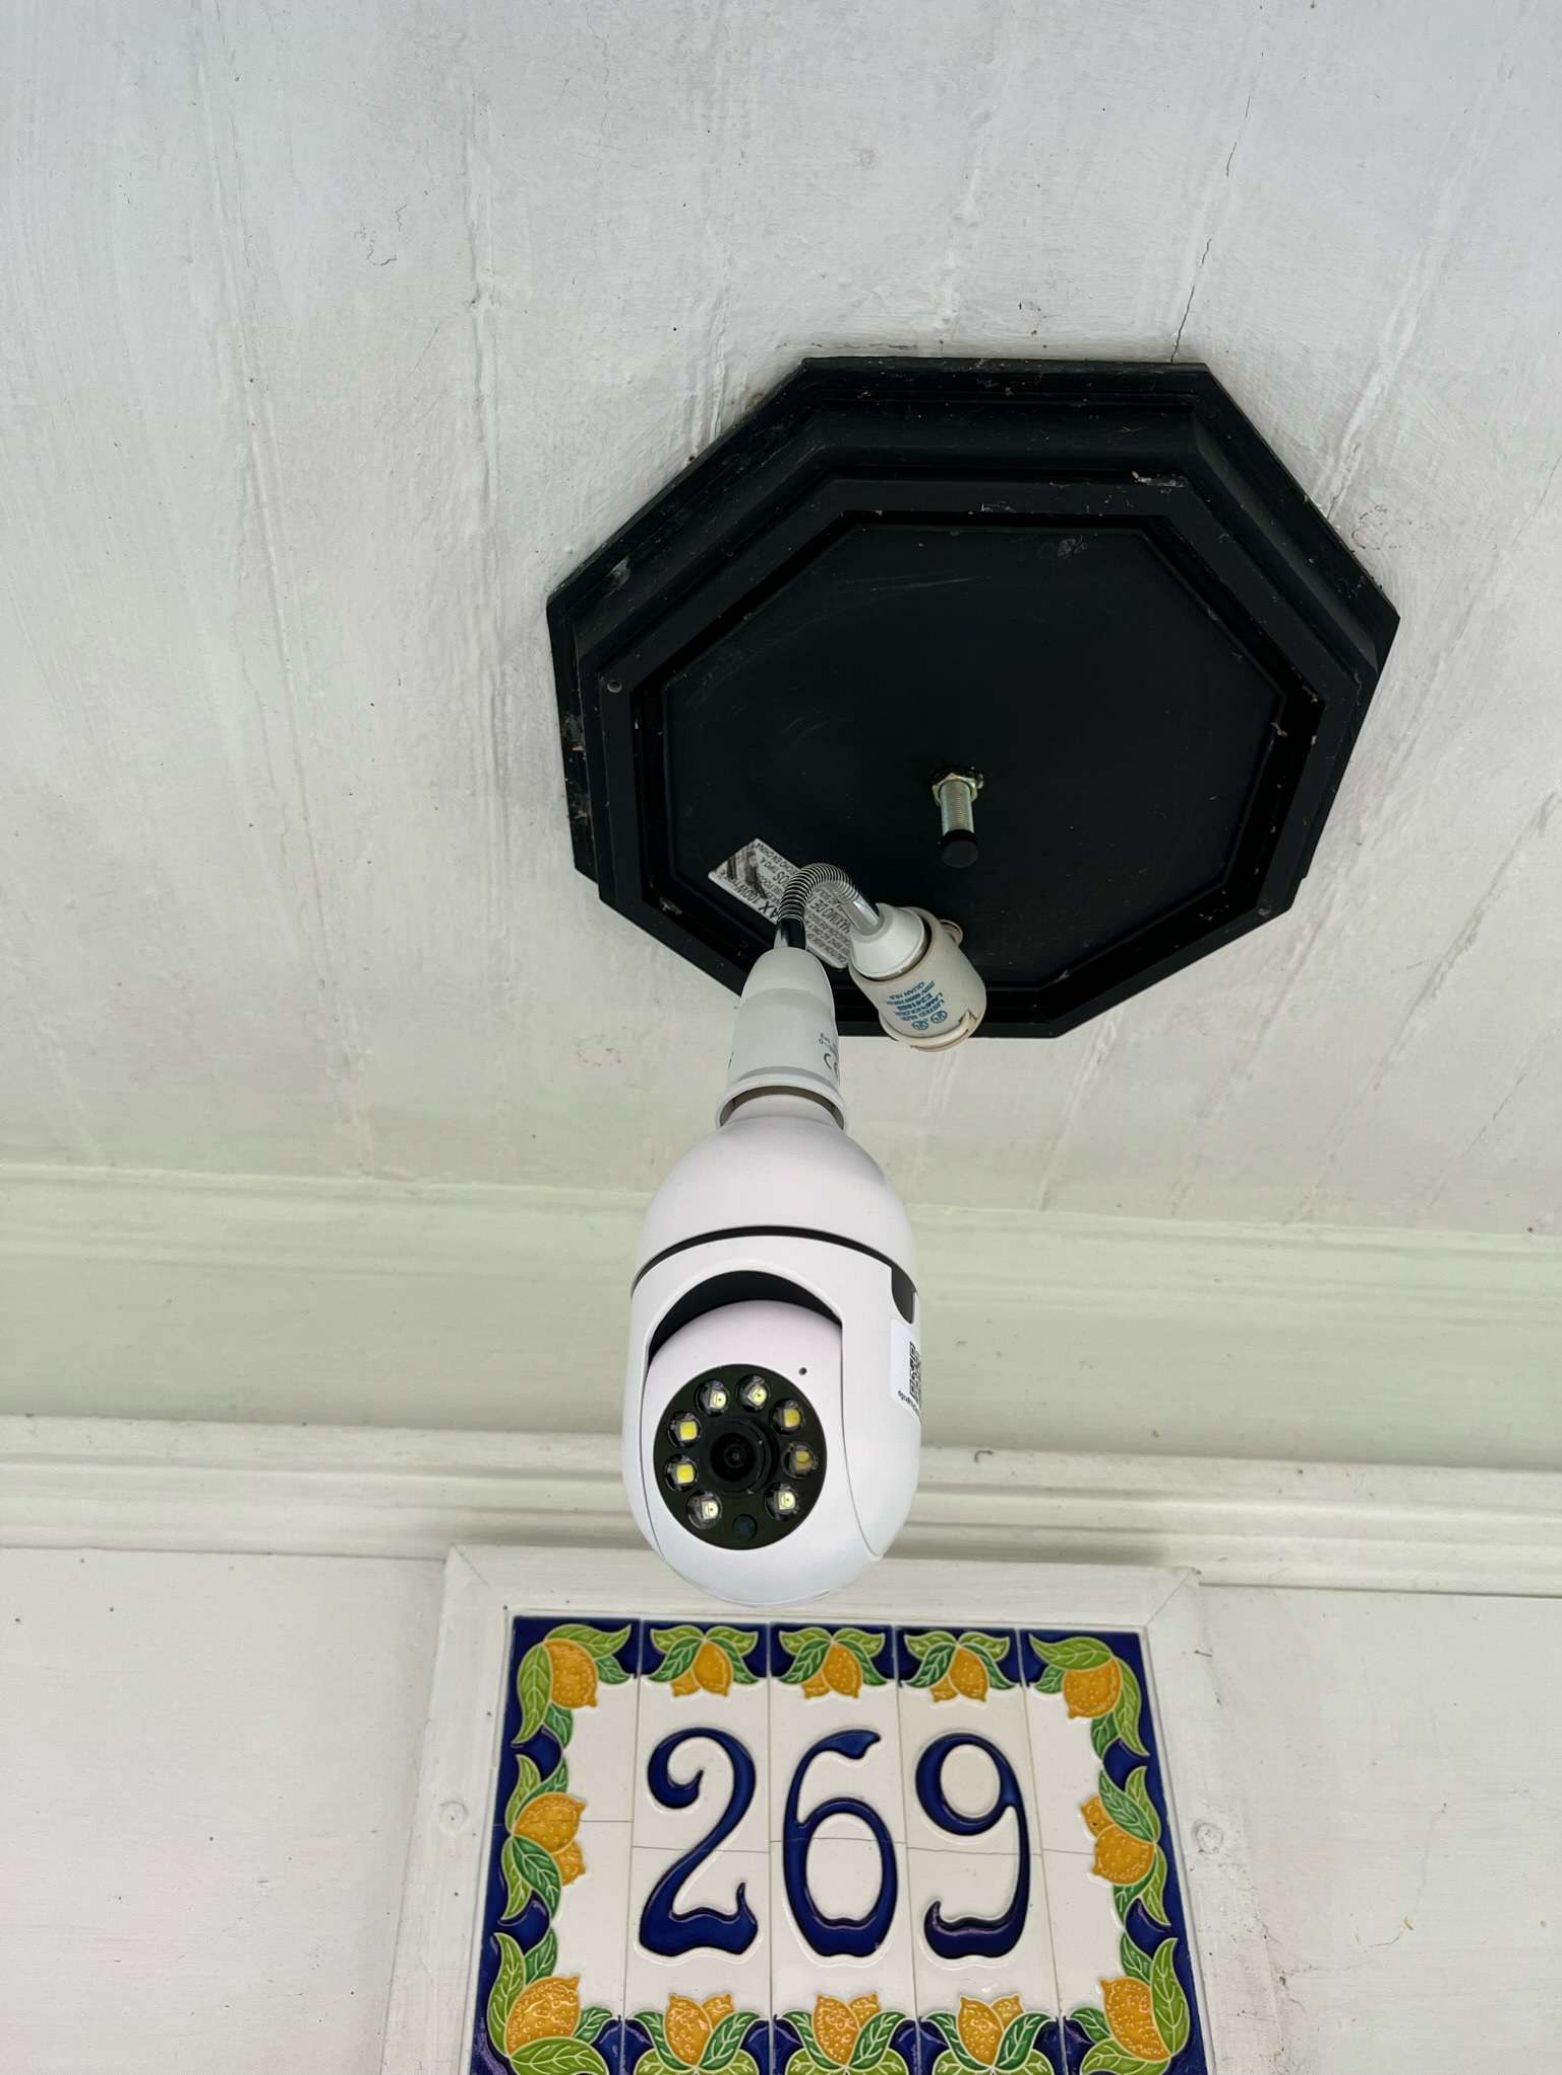 Nomad Security Camera Specifications